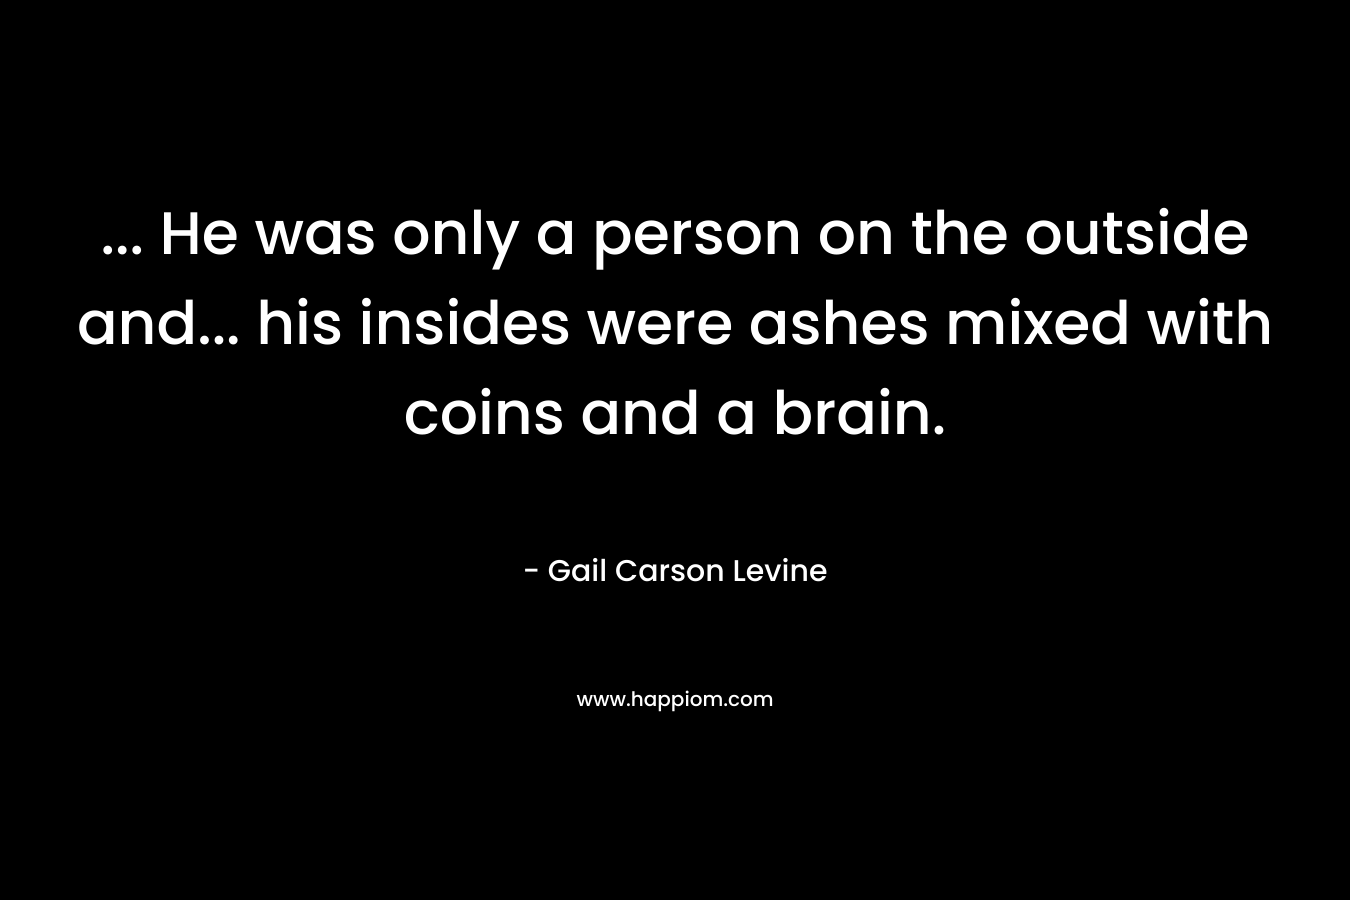 ... He was only a person on the outside and... his insides were ashes mixed with coins and a brain.